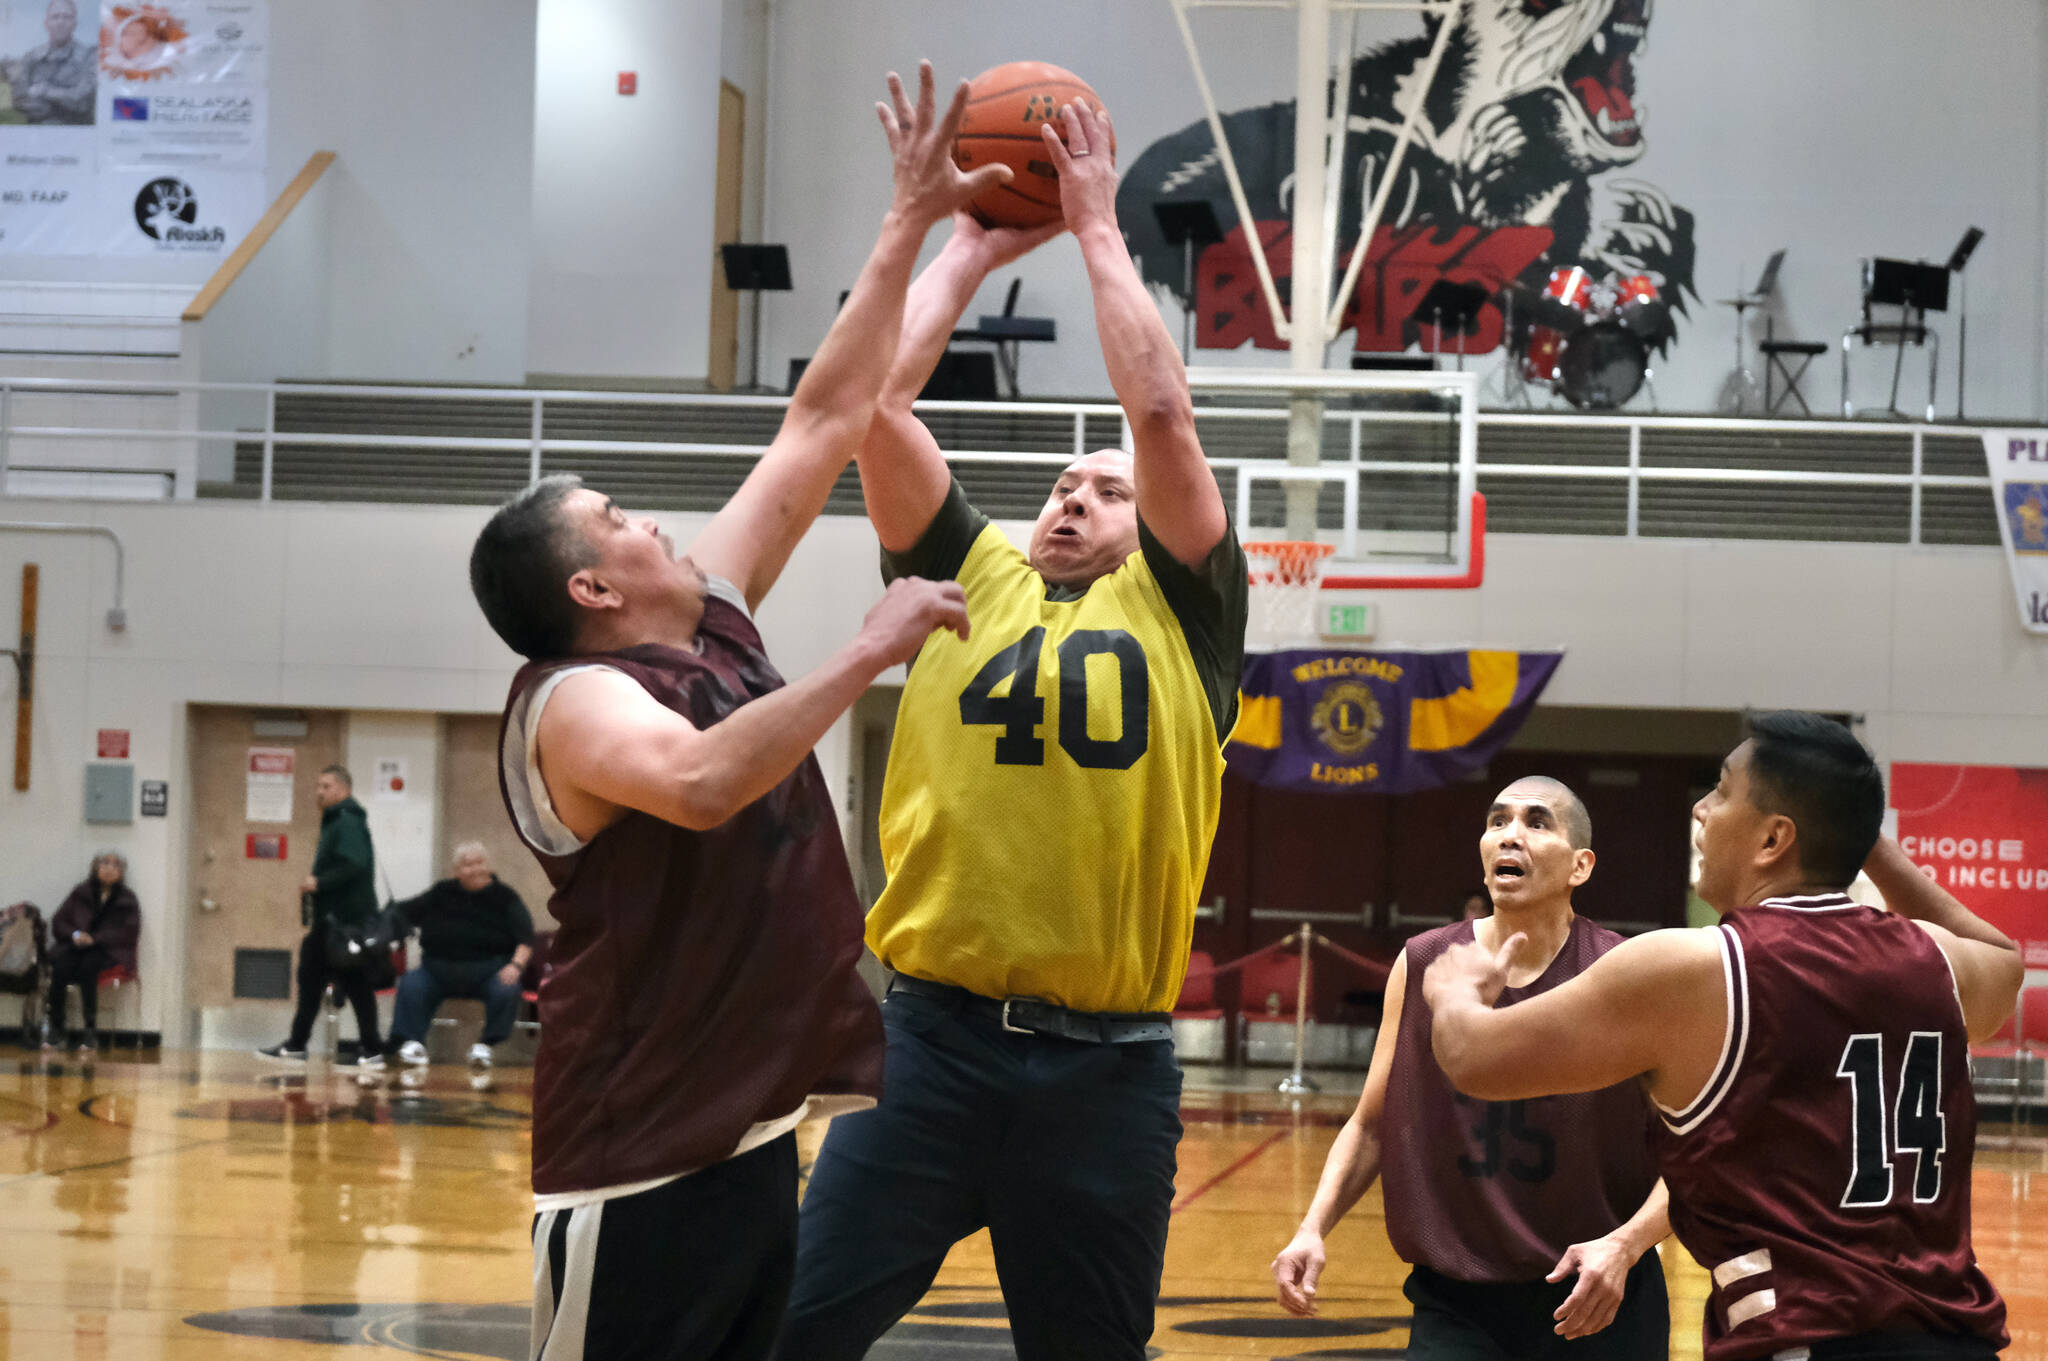 Hoonah’s Albert Hinchman defends as hot by Sitka’s Patrick Miller (40) as Hoonah’s Andy Gray, Louie White Jr. and Joe Coronell look on during Thursday action at the Juneau Lions Club 74th Gold Medal Basketball Tournament at Juneau-Douglas High School: Yadaa.at Kalé. (Klas Stolpe/For the Juneau Empire)